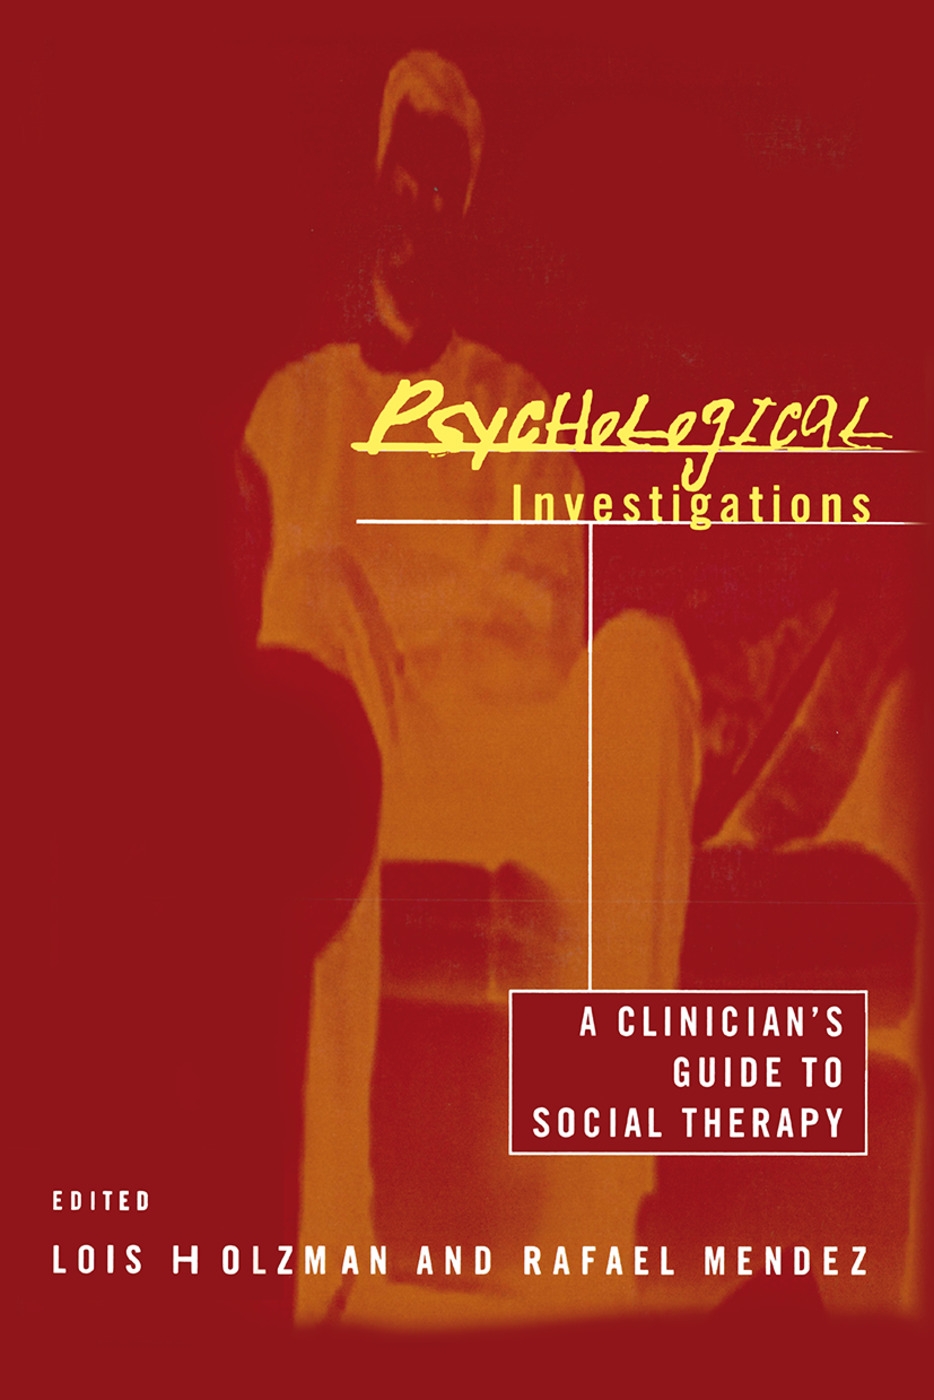 Psychological Investigations: A Clinician’s Guide to Social Therapy